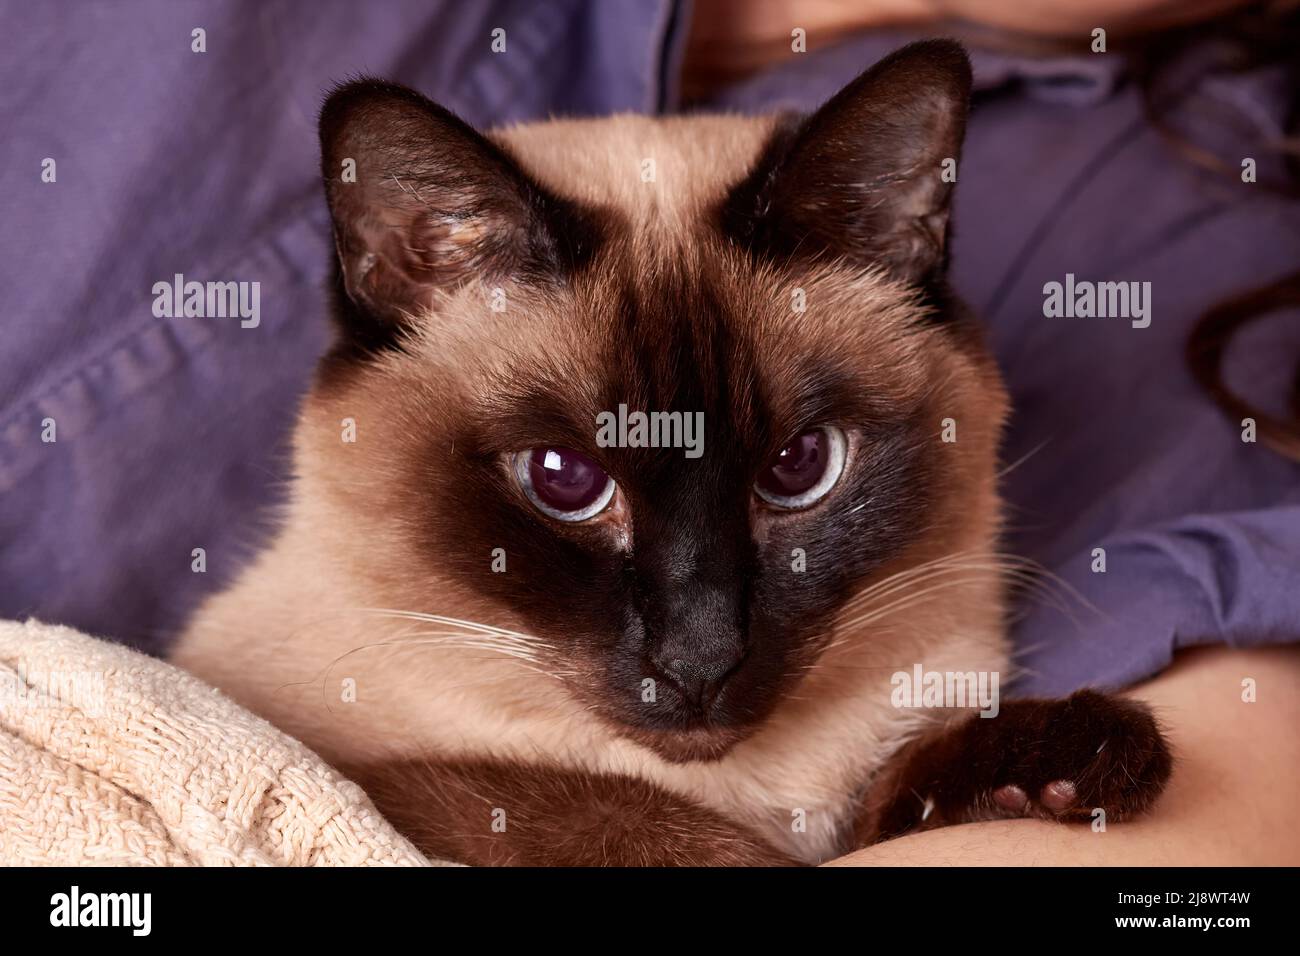 A funny portrait of a Thai domestic cat with a large blue eyes. Stock Photo